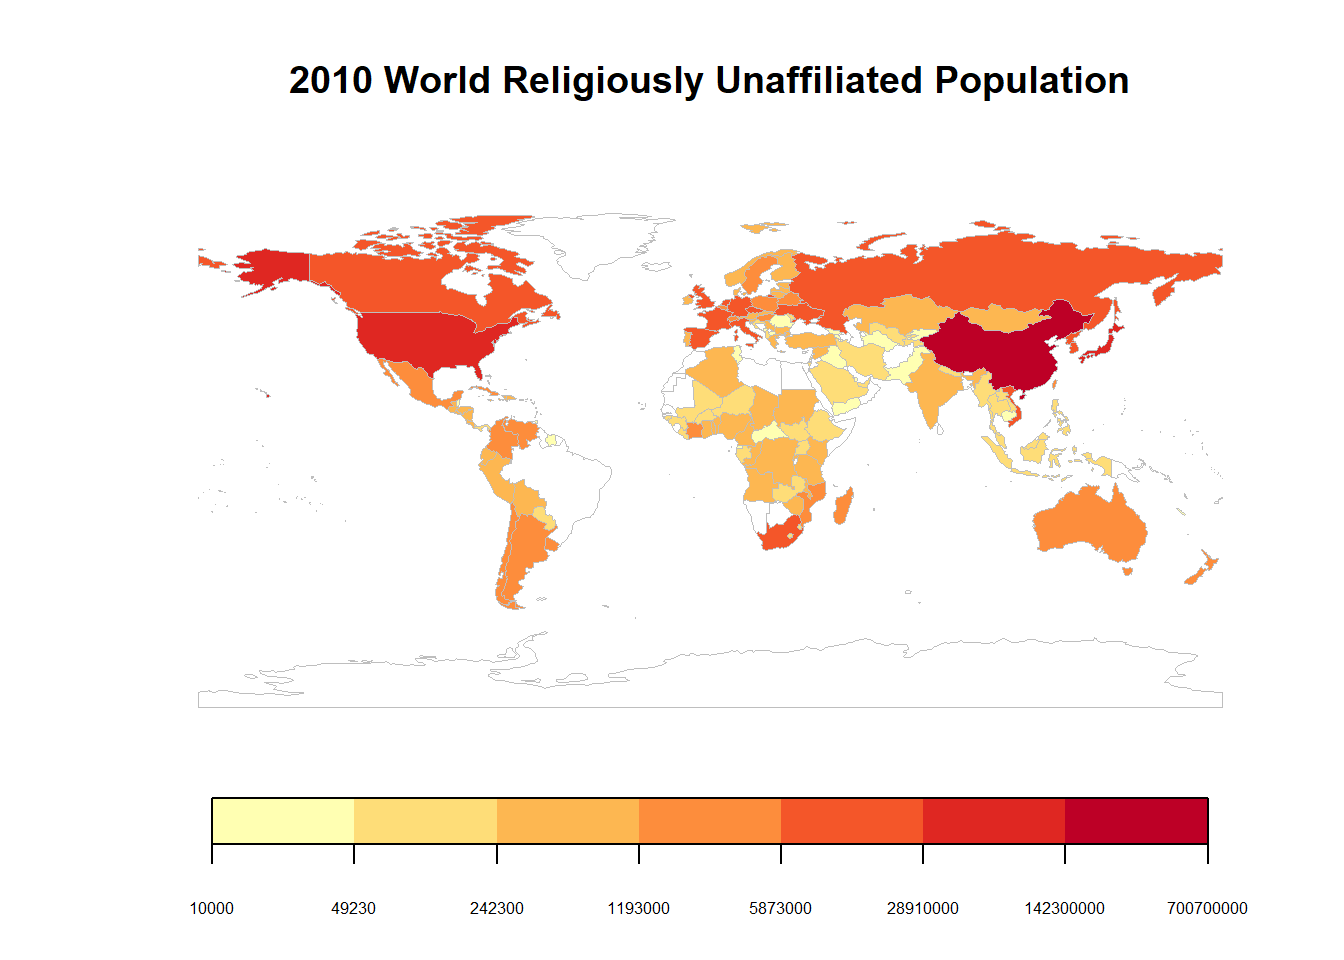 Country Heat Map of Religious Unaffiiated Population in 2010